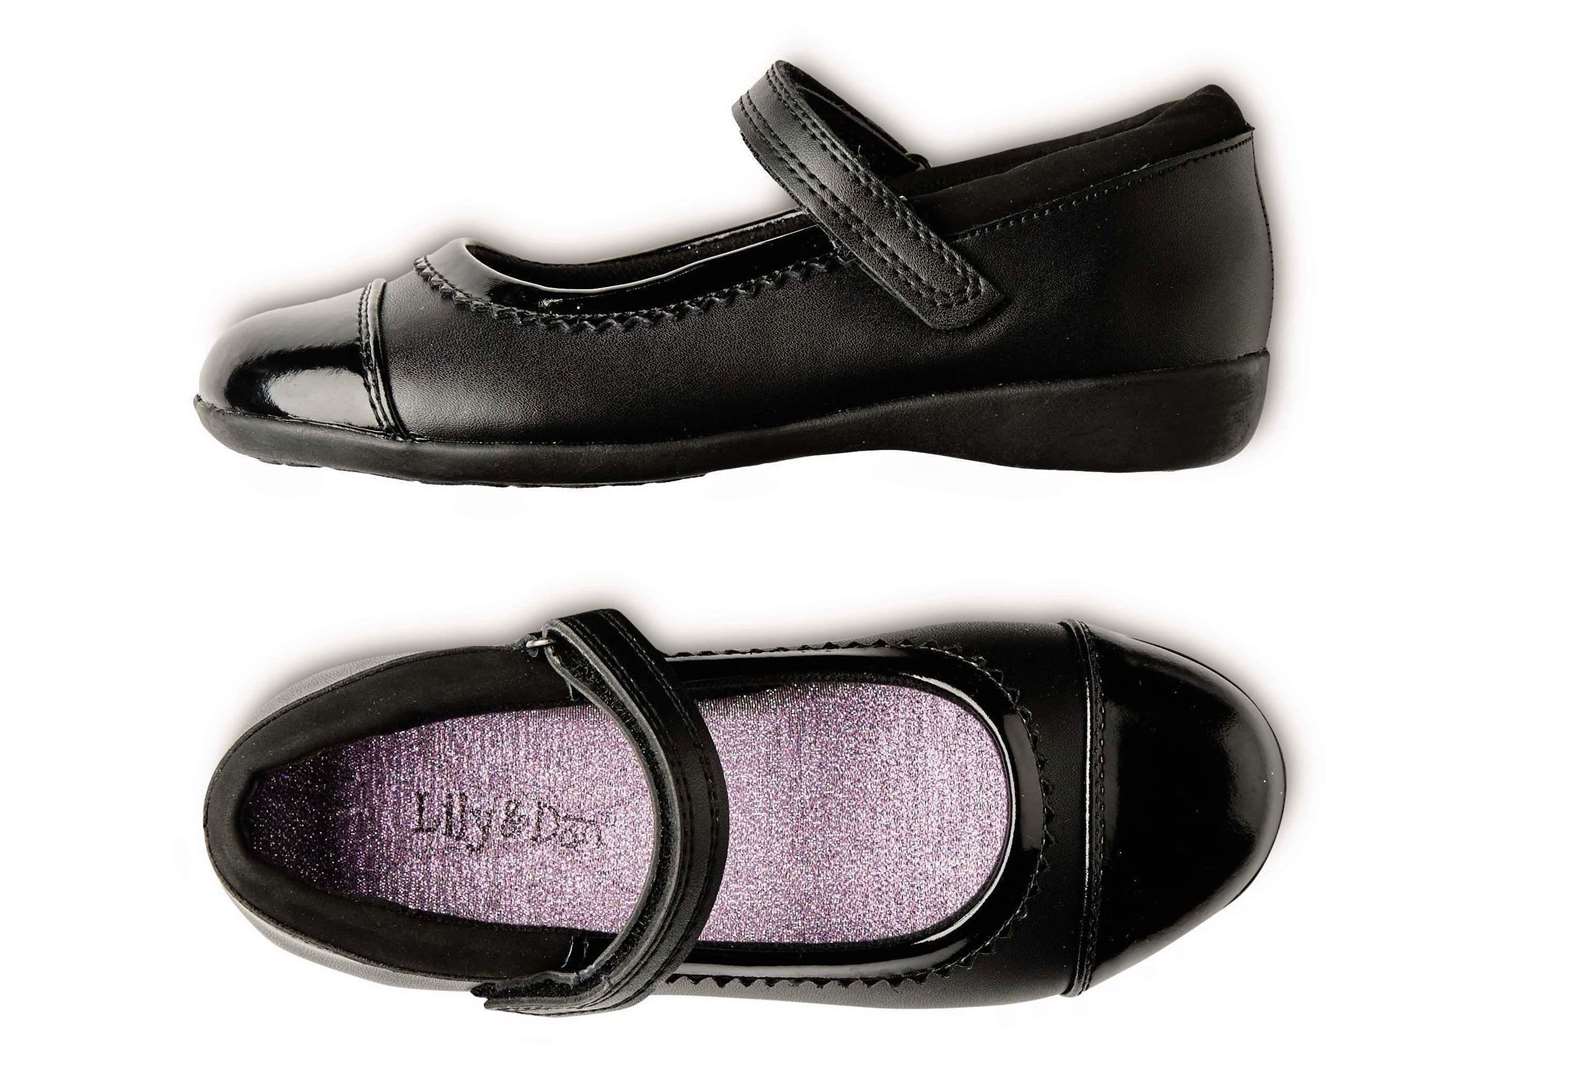 Girls' Action Leather Shoes, £6.99, Aldi